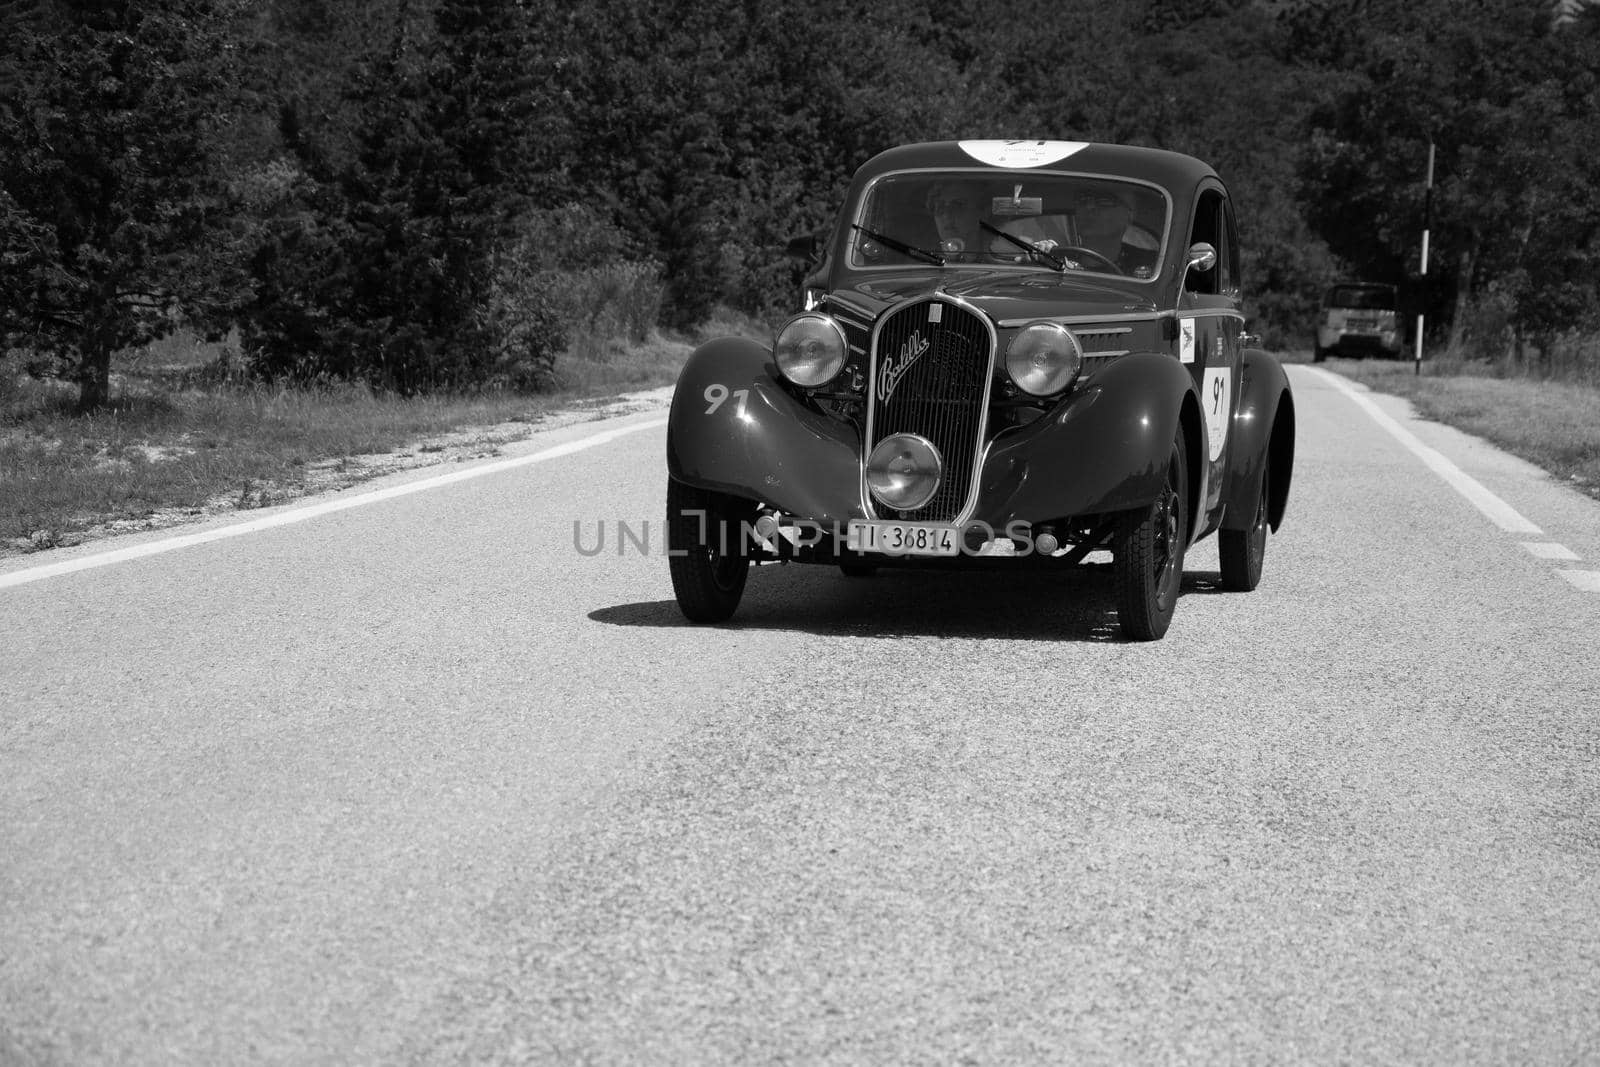 FIAT 508 S MM BALILLA BERLINETTA AERODINAMICA 1935 on an old racing car in rally Mille Miglia 2022 the famous italian historical race (1927-1957 by massimocampanari